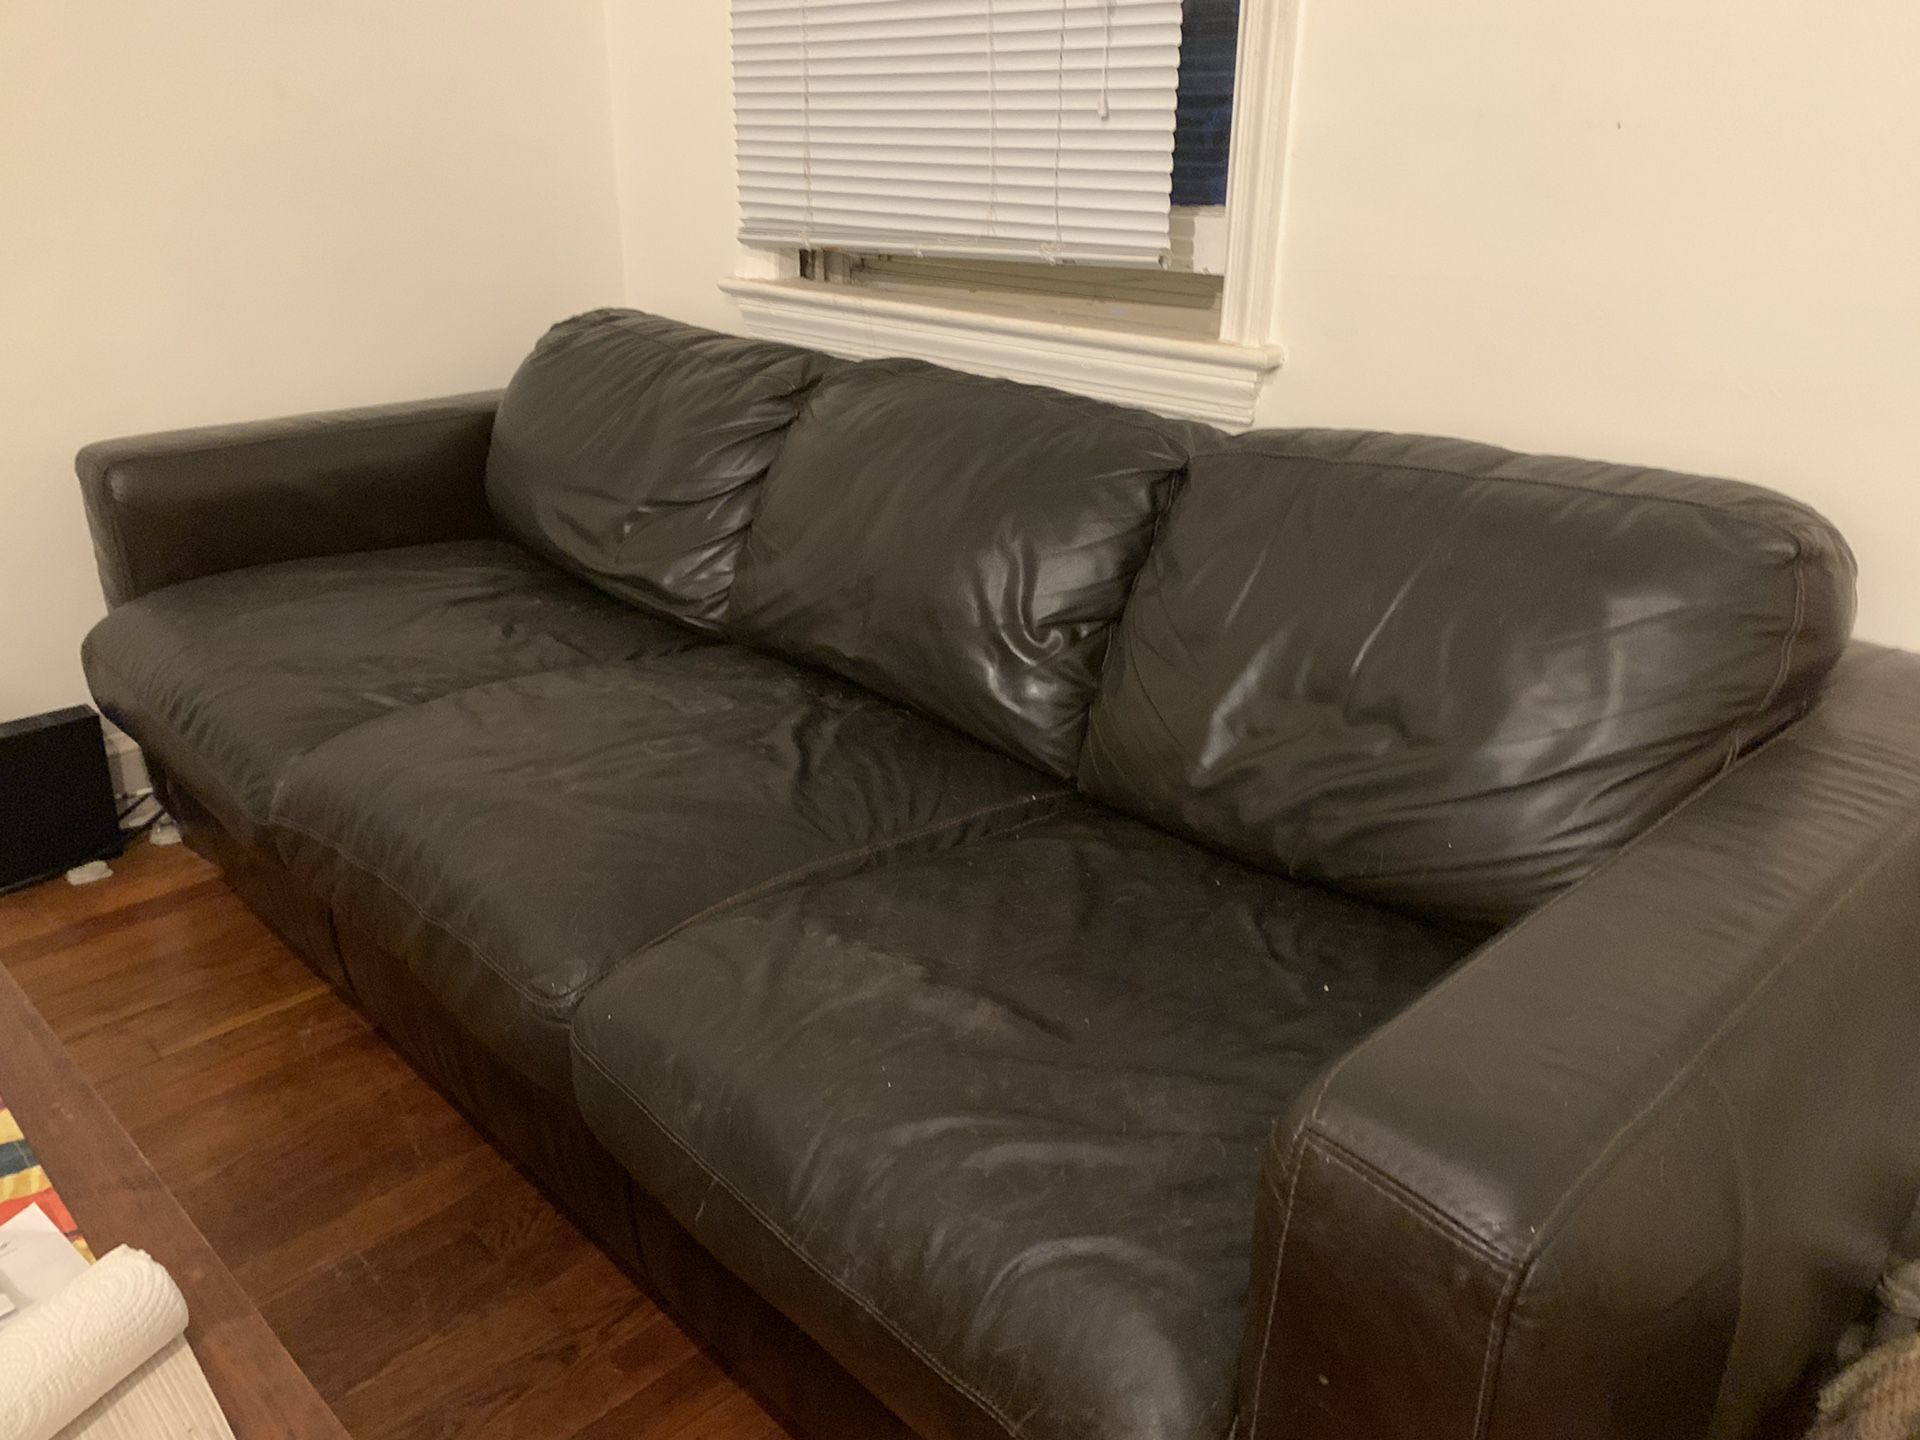 Super comfy black leather couch with matching footrest